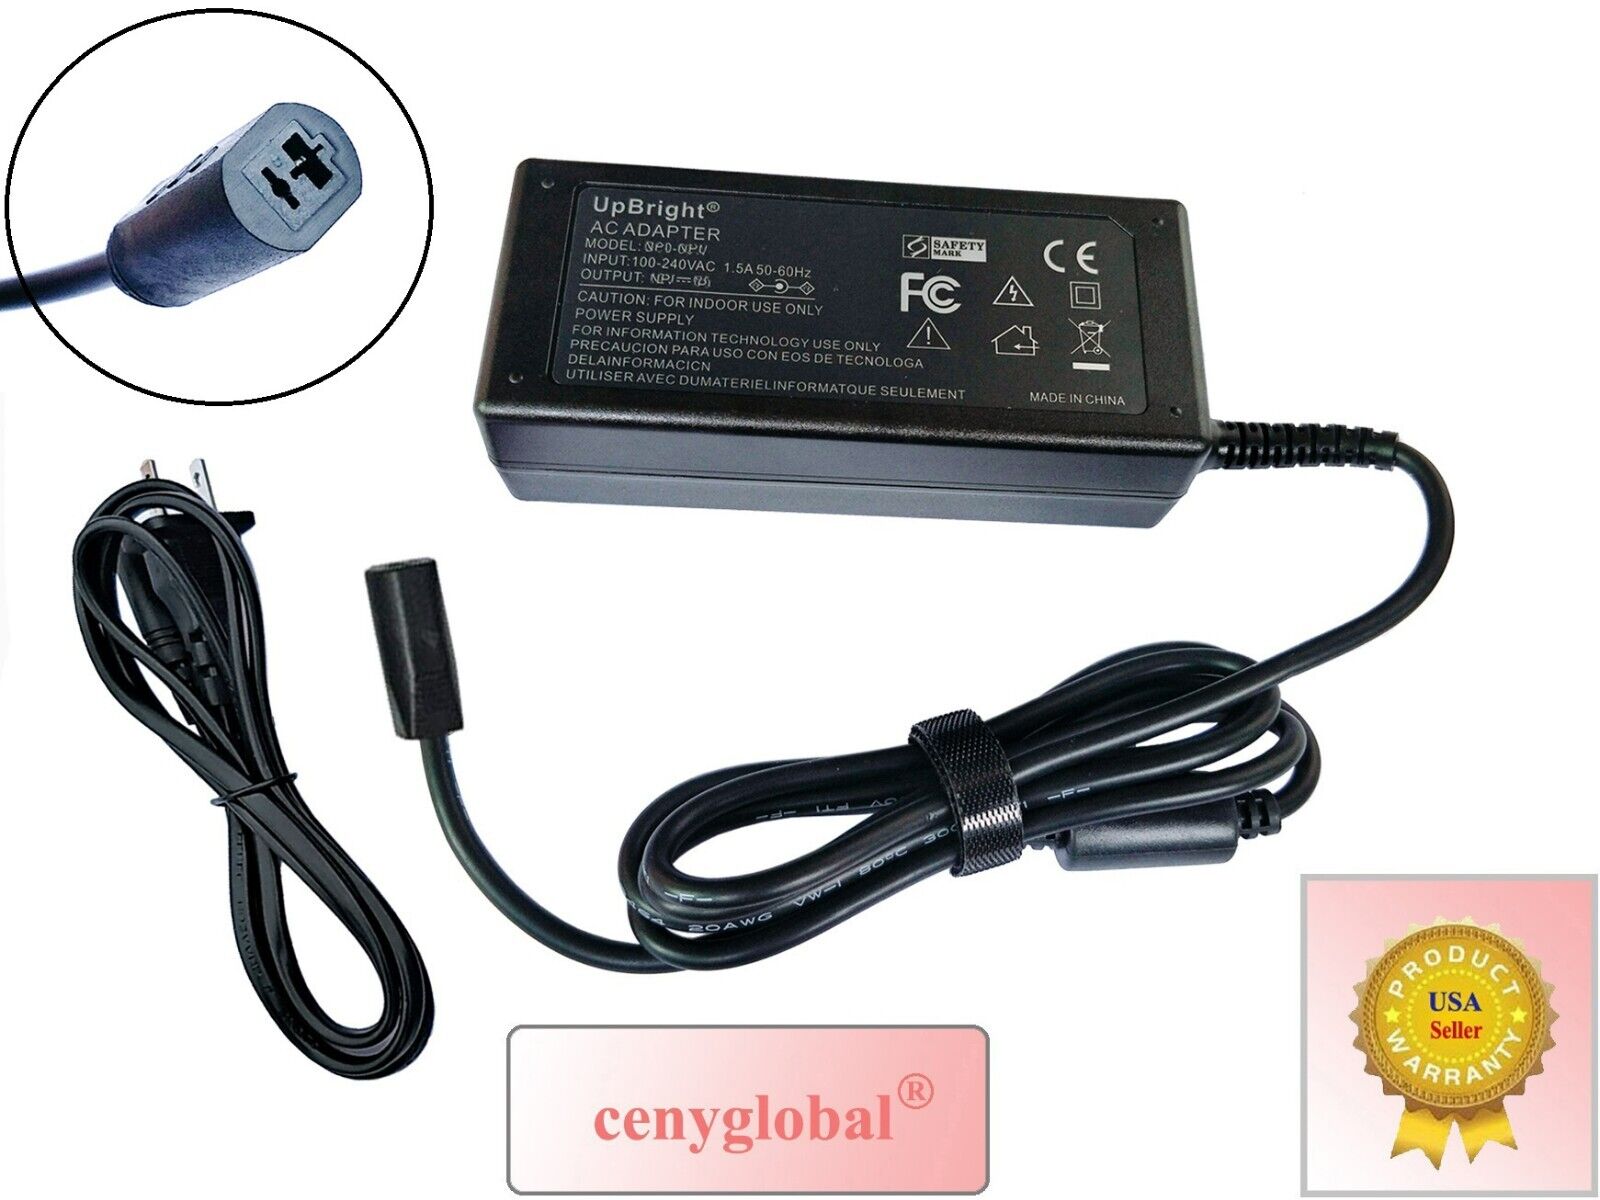 AC Adapter For WindyNation Linear Actuator DC Motor Control LIN-SPSU-12 Charger